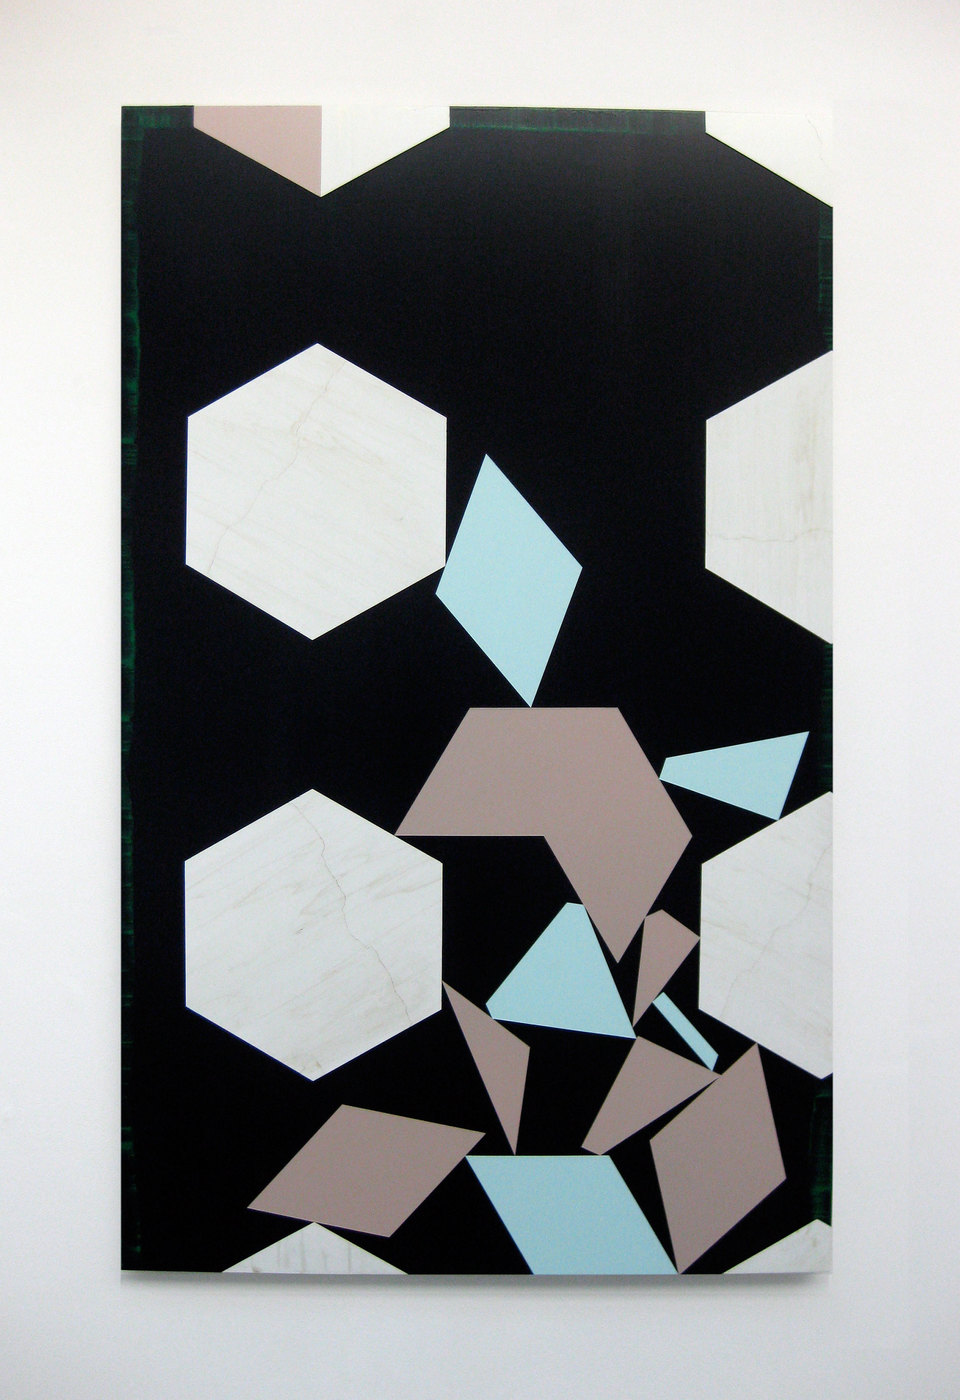 Andy Jackson, Set 1 (Bin), 2010, Acrylic and Metallic Acrylic on Board, (h.1610mm x w.996mm), Cell Project Space